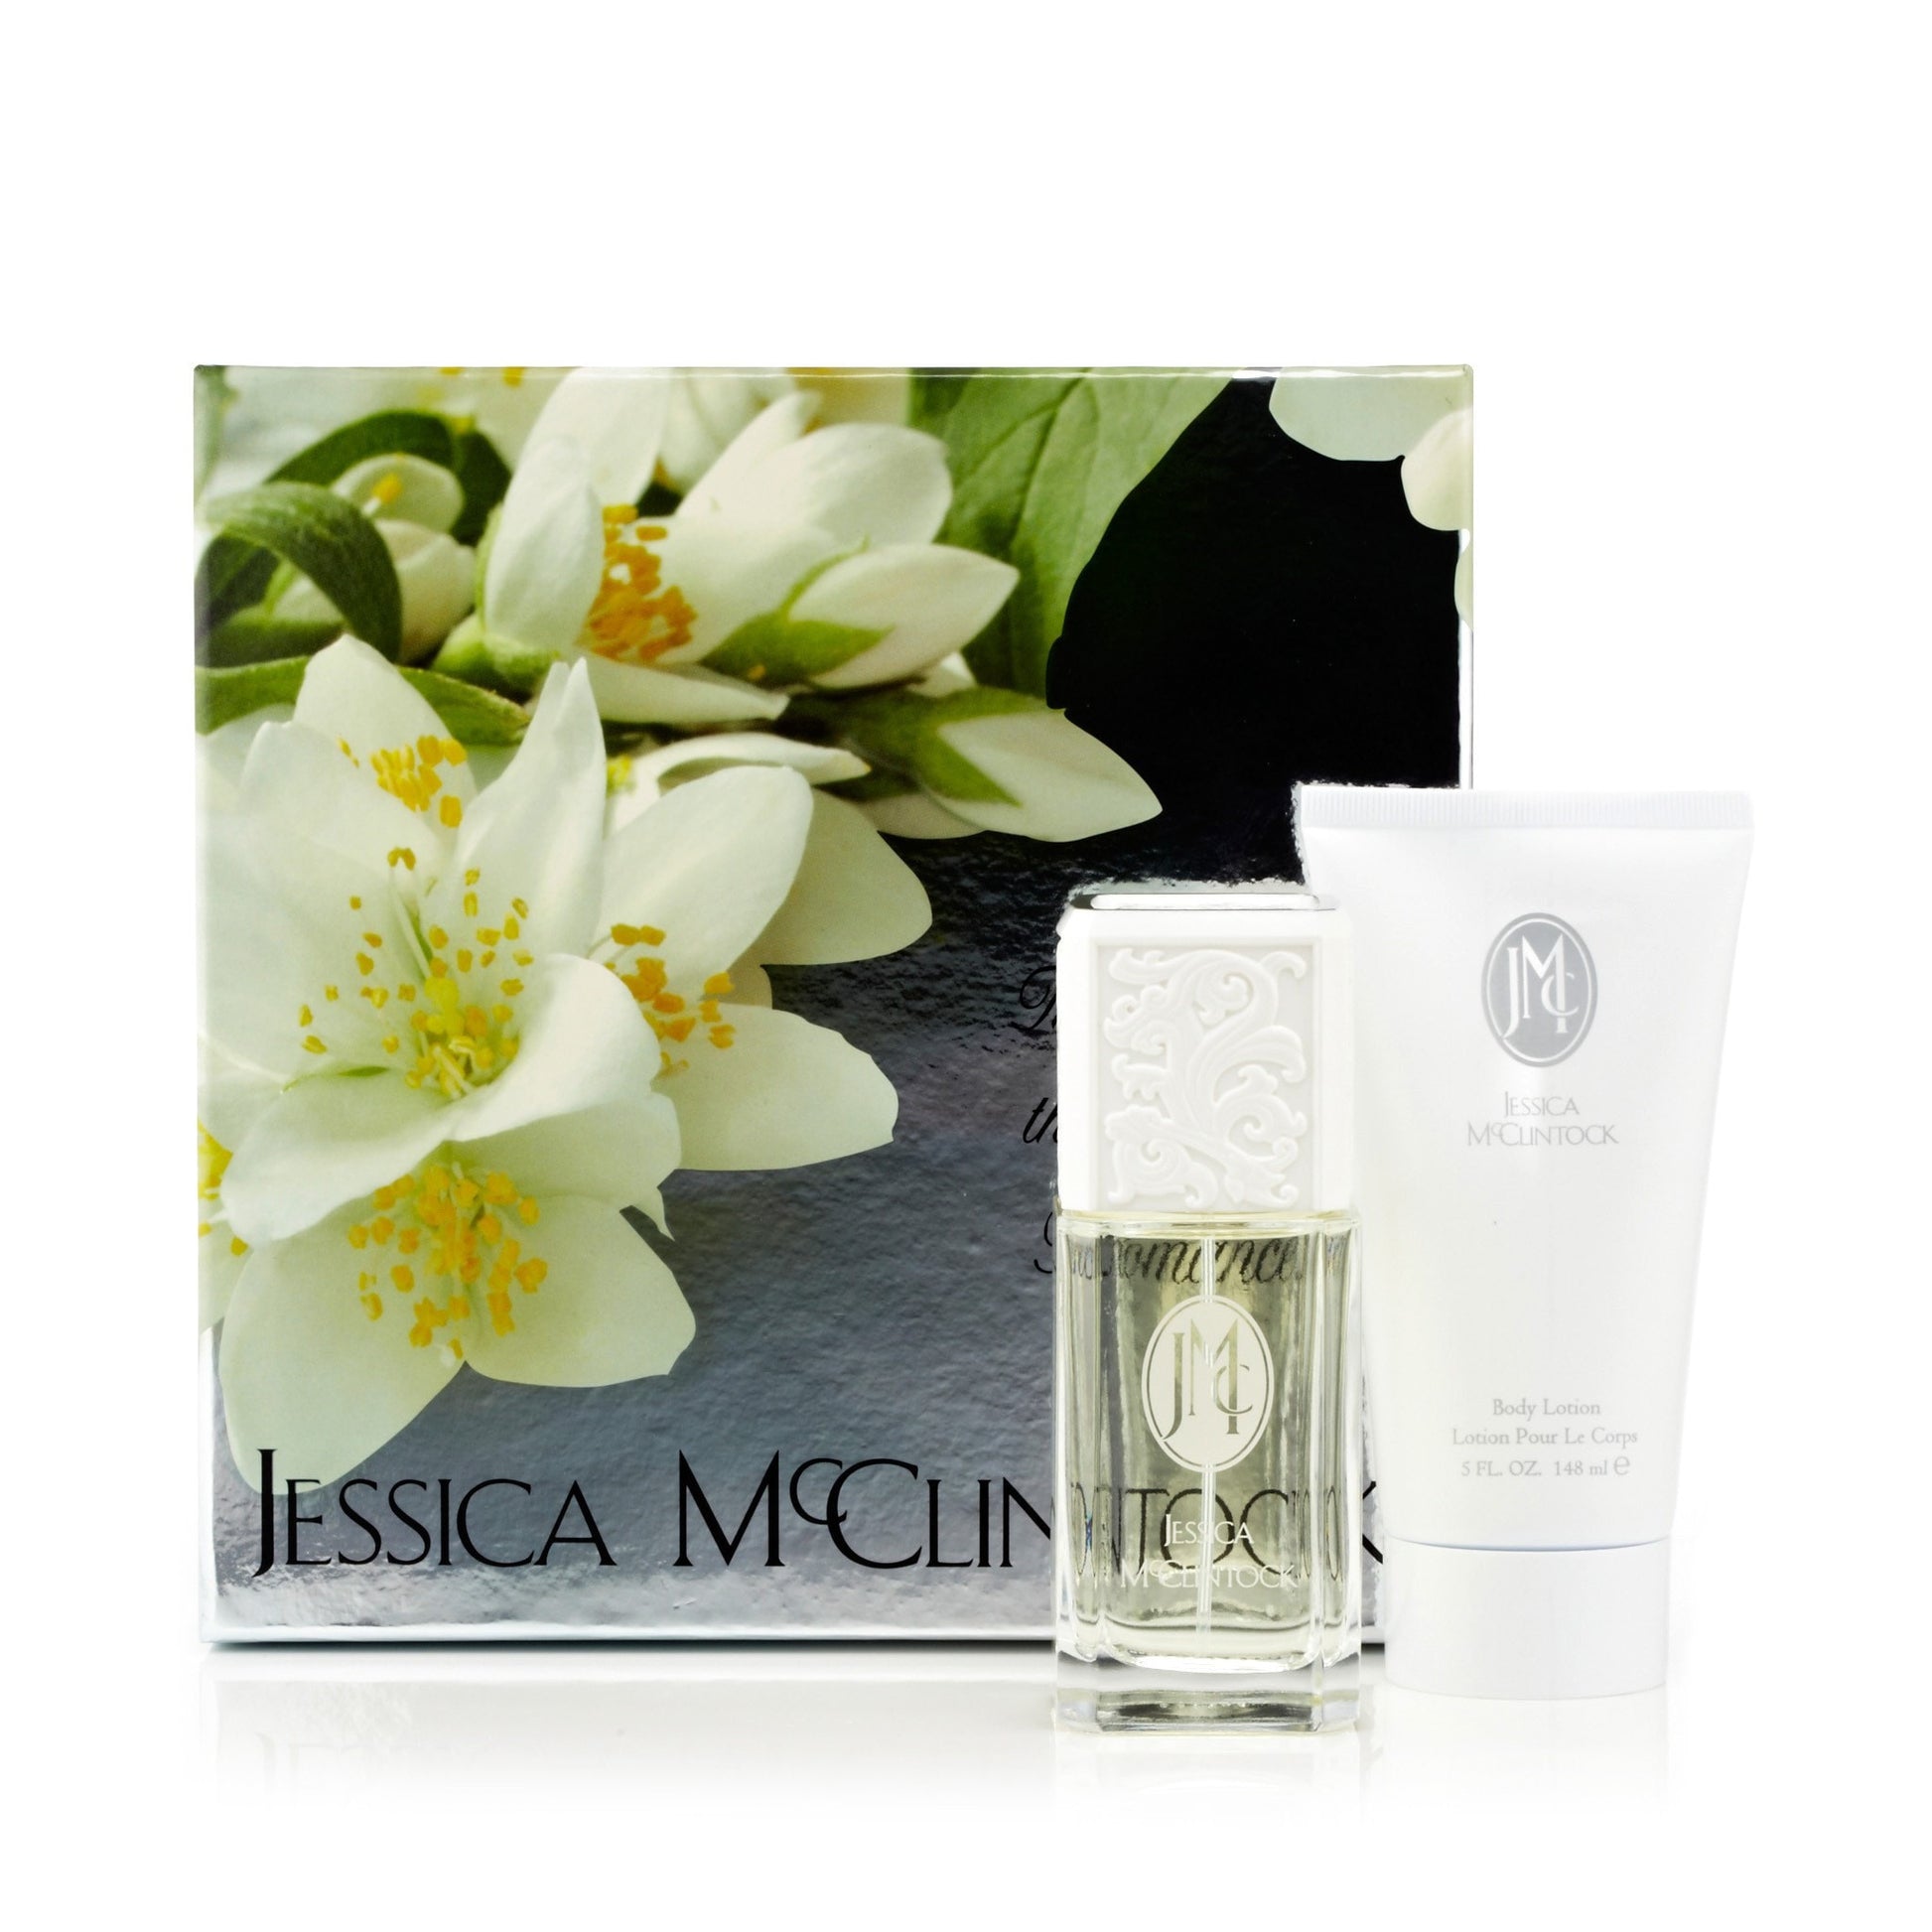 Jessica Mcclintock Gift Set for Women by Jessica McClintock 4.0 oz. Click to open in modal